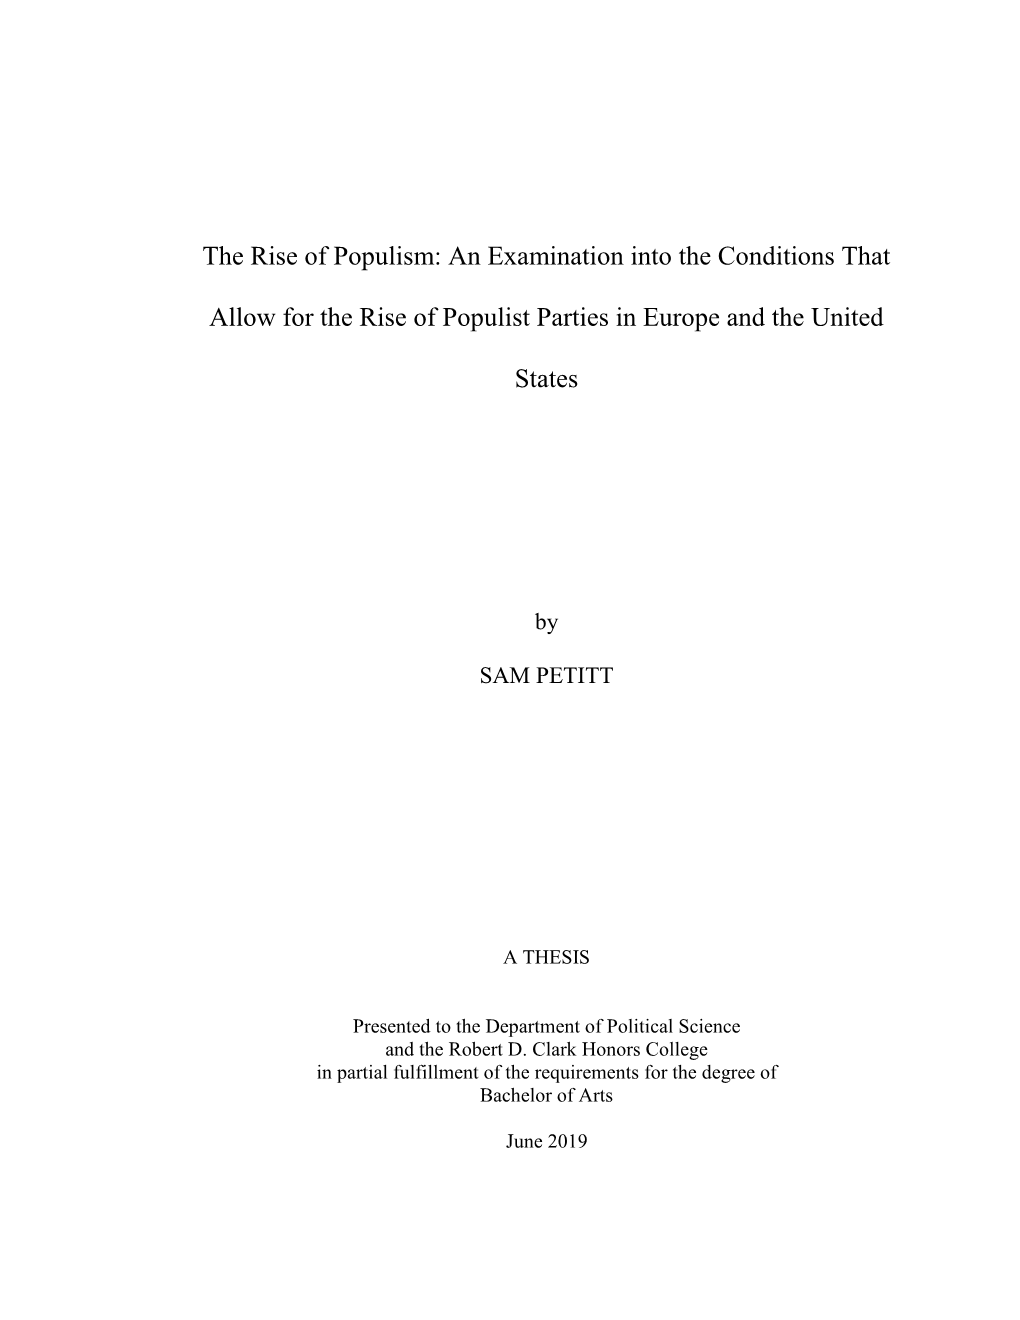 The Rise of Populism: an Examination Into the Conditions That